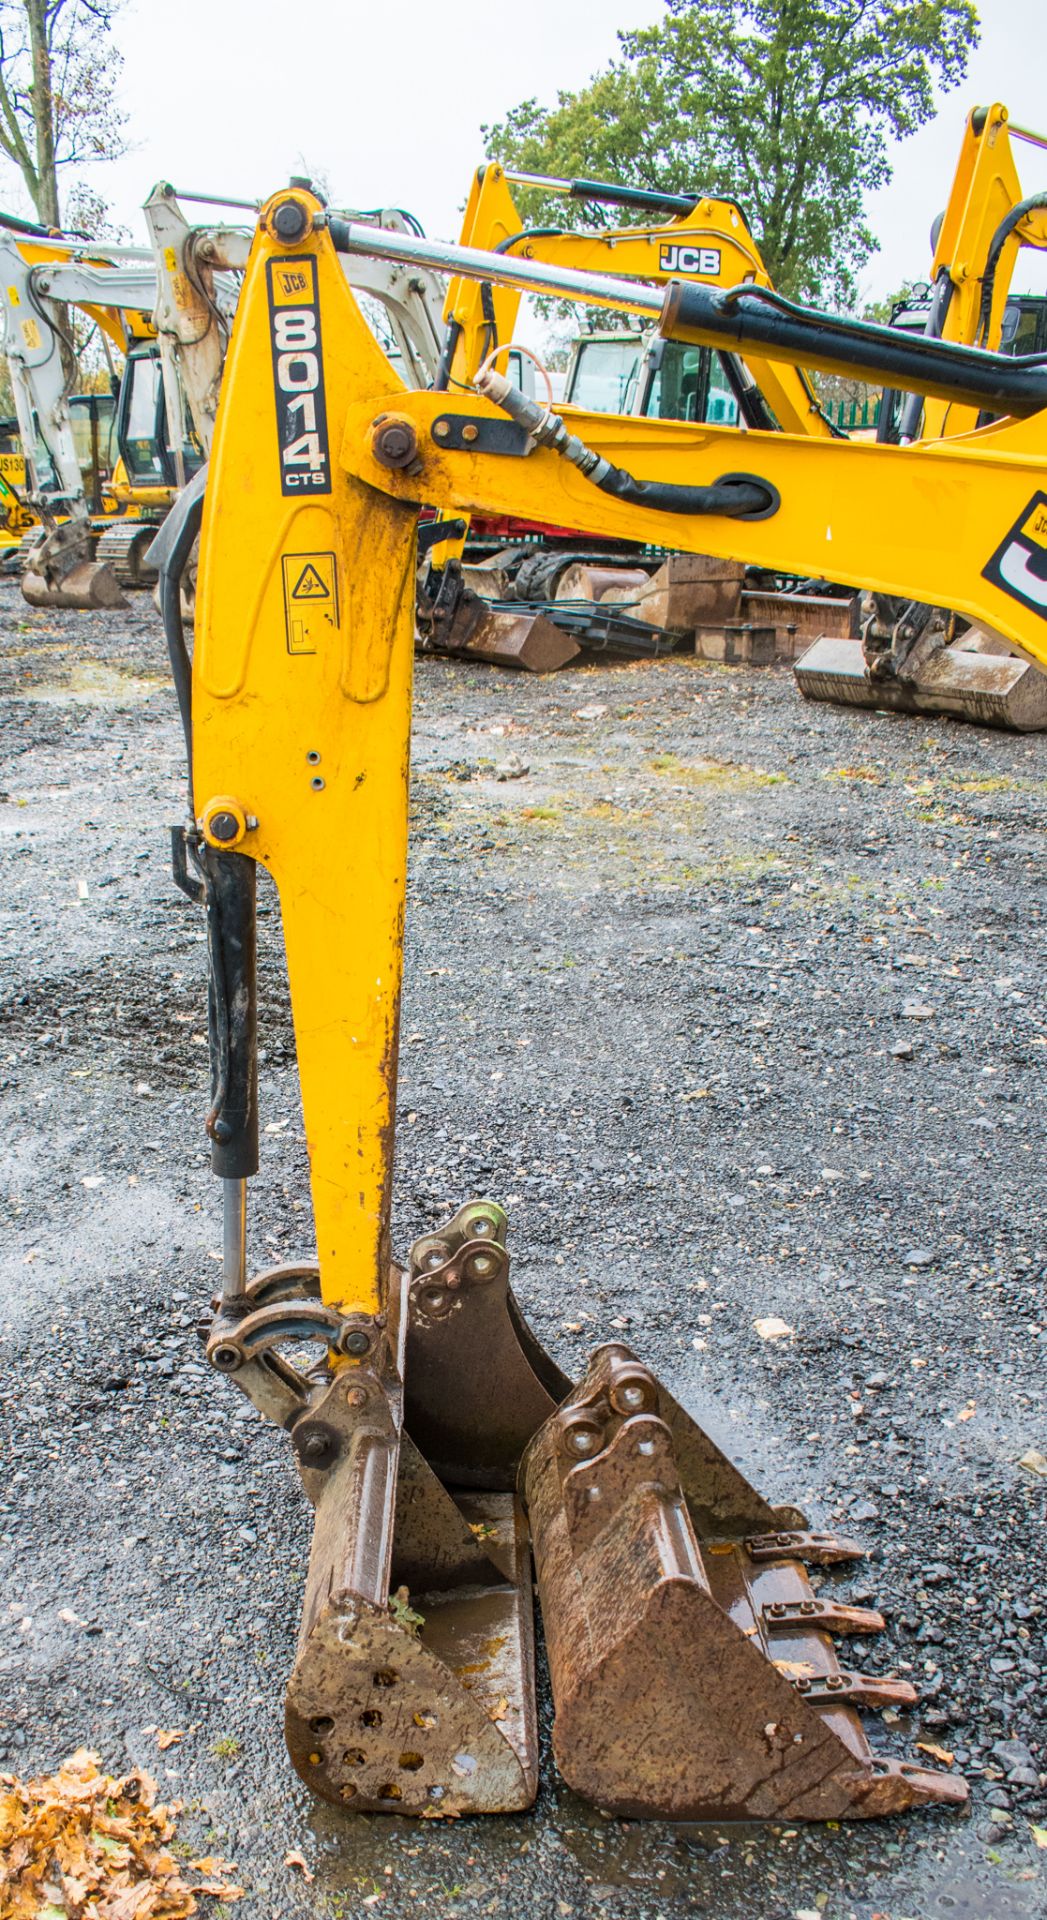 JCB 8014 CTS 1.5 tonne rubber tracked mini excavator  Year:  2014 S/N: 2070466 Recorded Hours: - Image 13 of 18